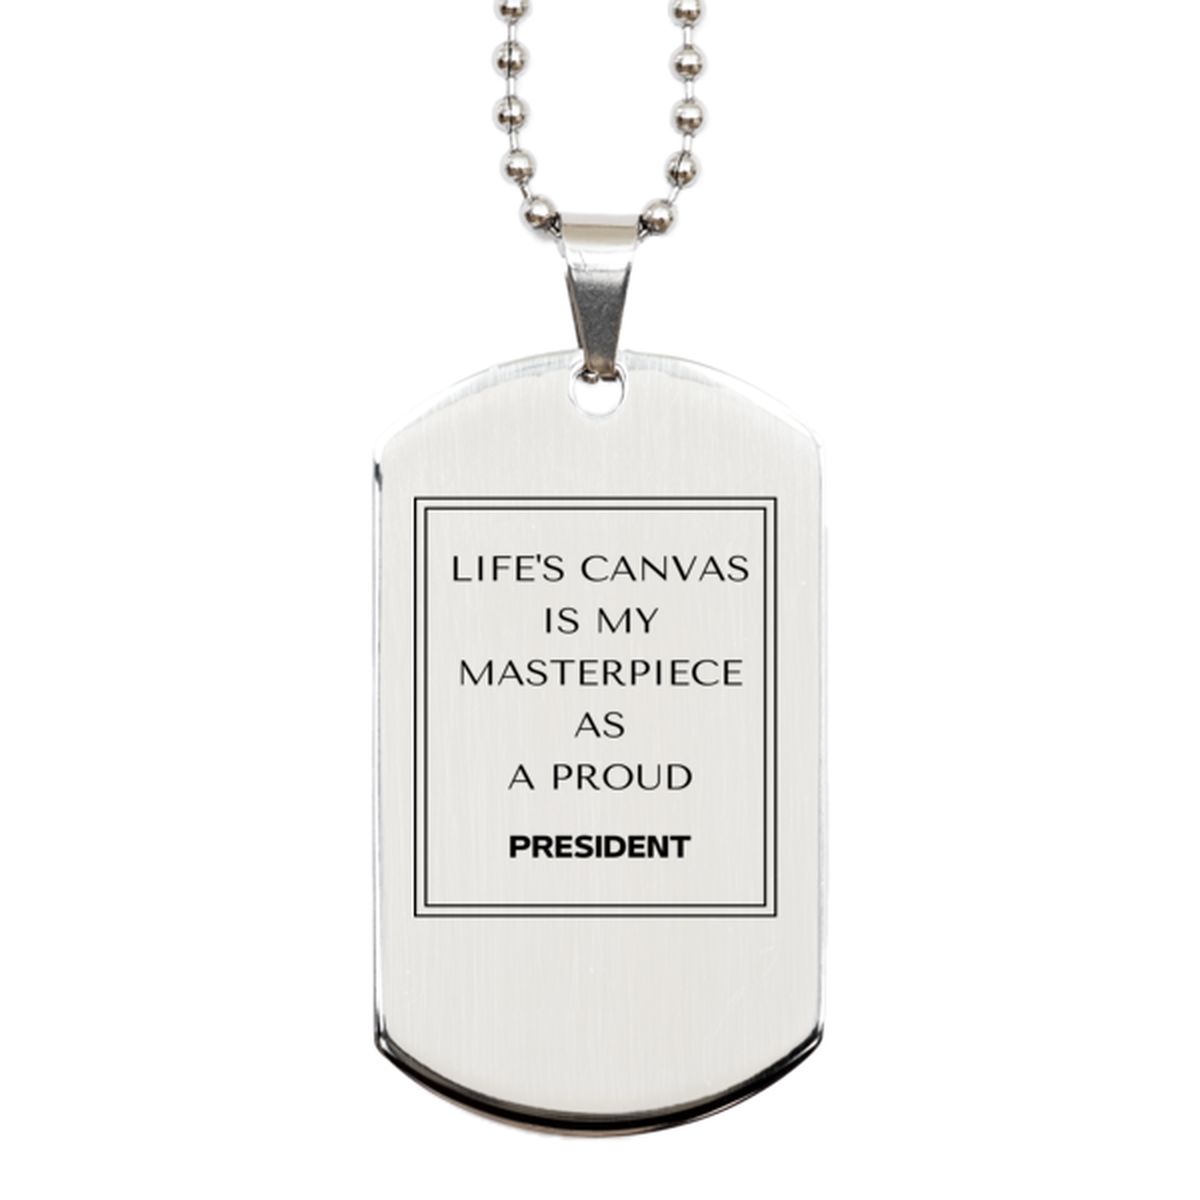 Proud President Gifts, Life's canvas is my masterpiece, Epic Birthday Christmas Unique Silver Dog Tag For President, Coworkers, Men, Women, Friends